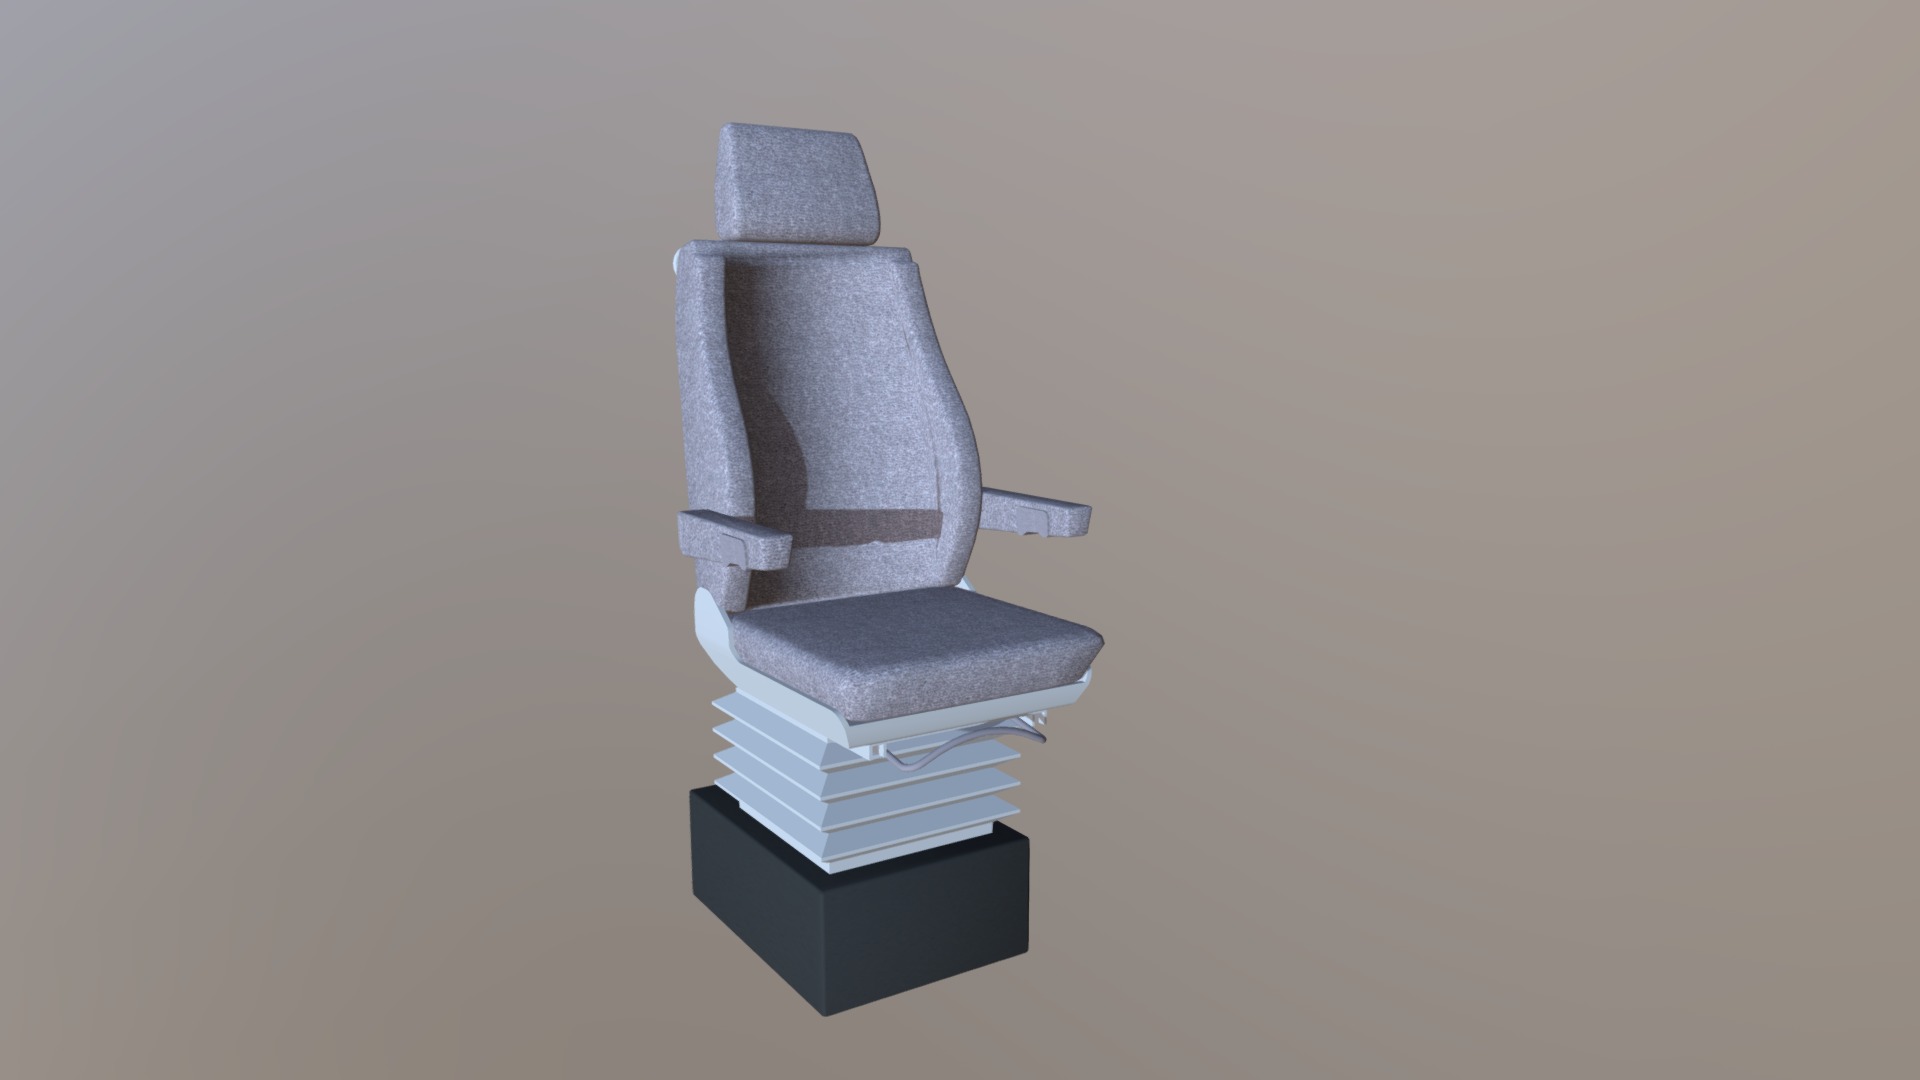 3D model Railway High Speed Railway Seats 03 - This is a 3D model of the Railway High Speed Railway Seats 03. The 3D model is about a grey chair with a grey cushion.